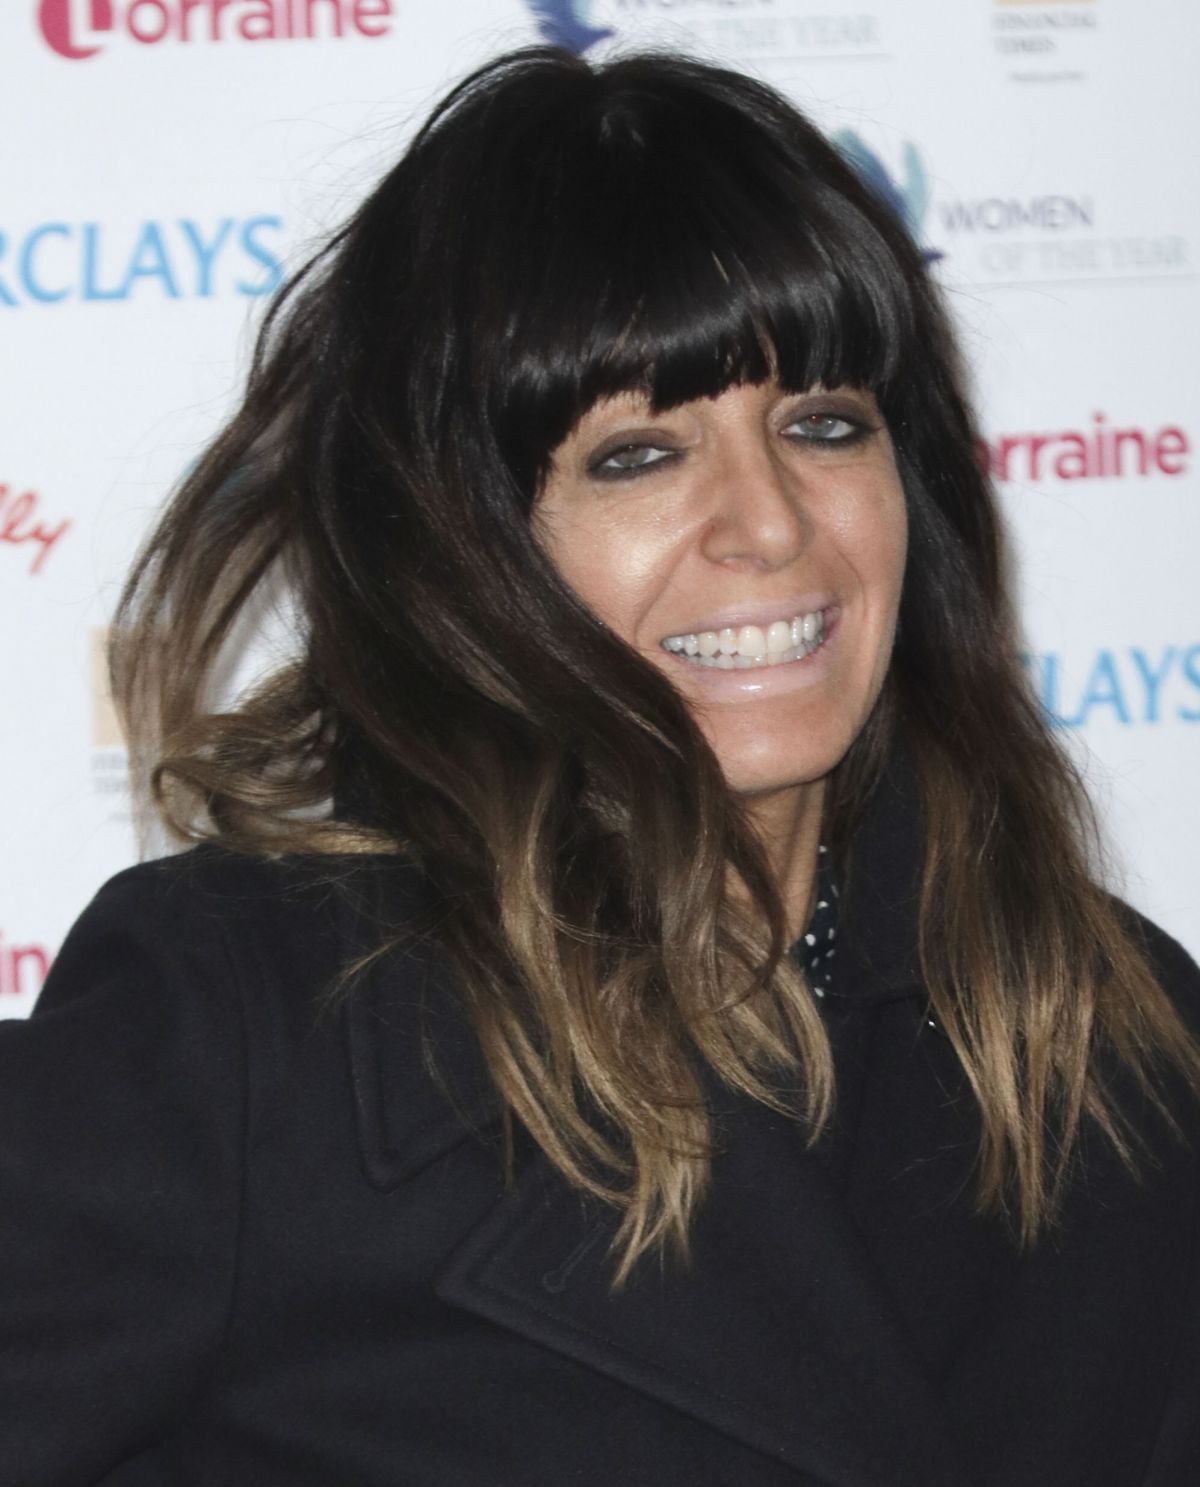 CLAUDIA WINKLEMAN at Women of the Year Awards 2018 in London 10/15/2018 ...